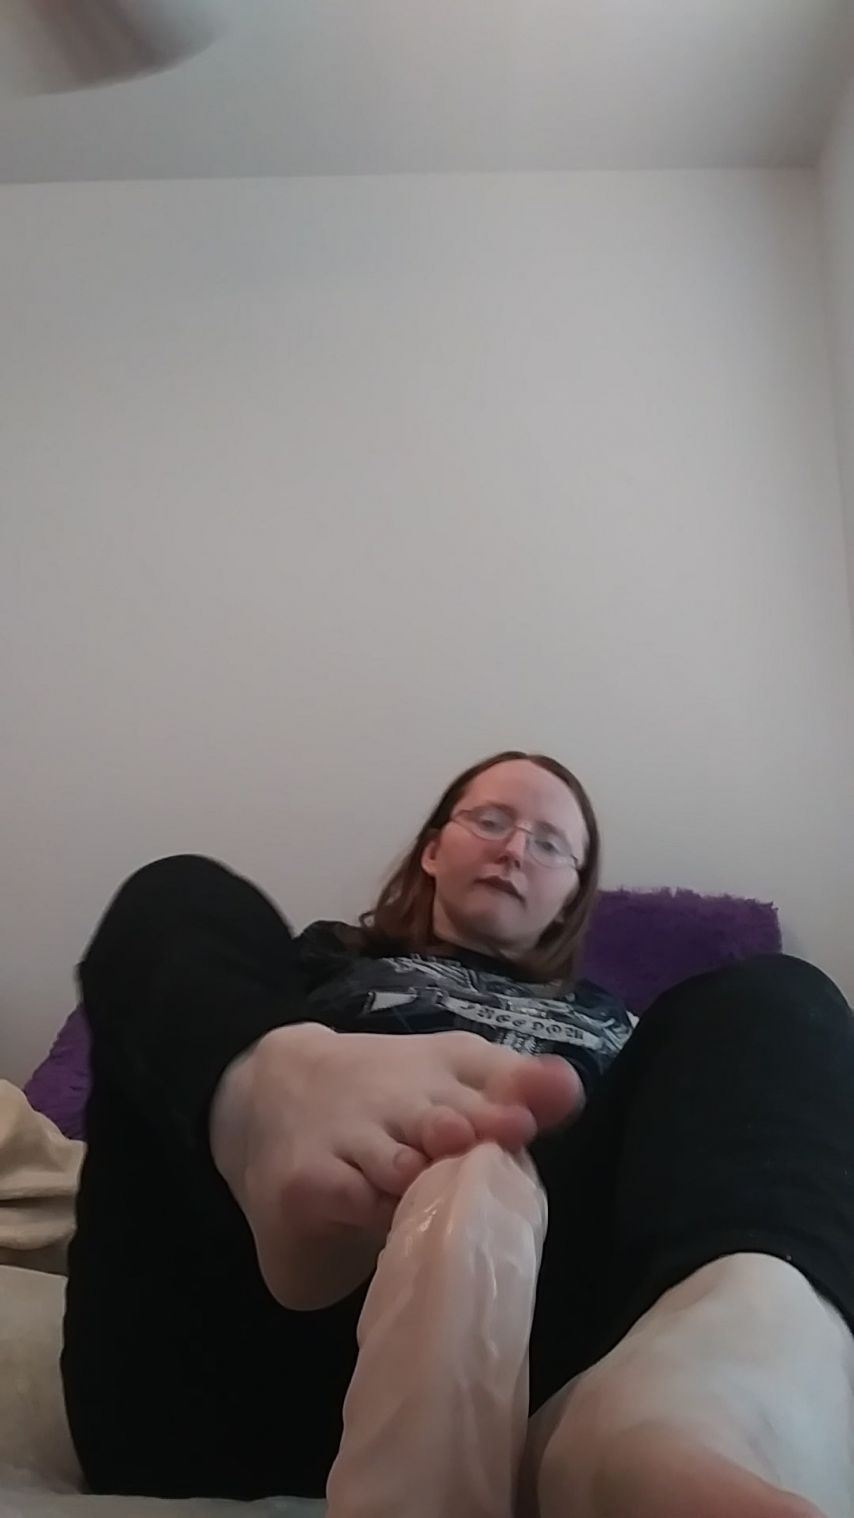 Heidi's first ever foot video